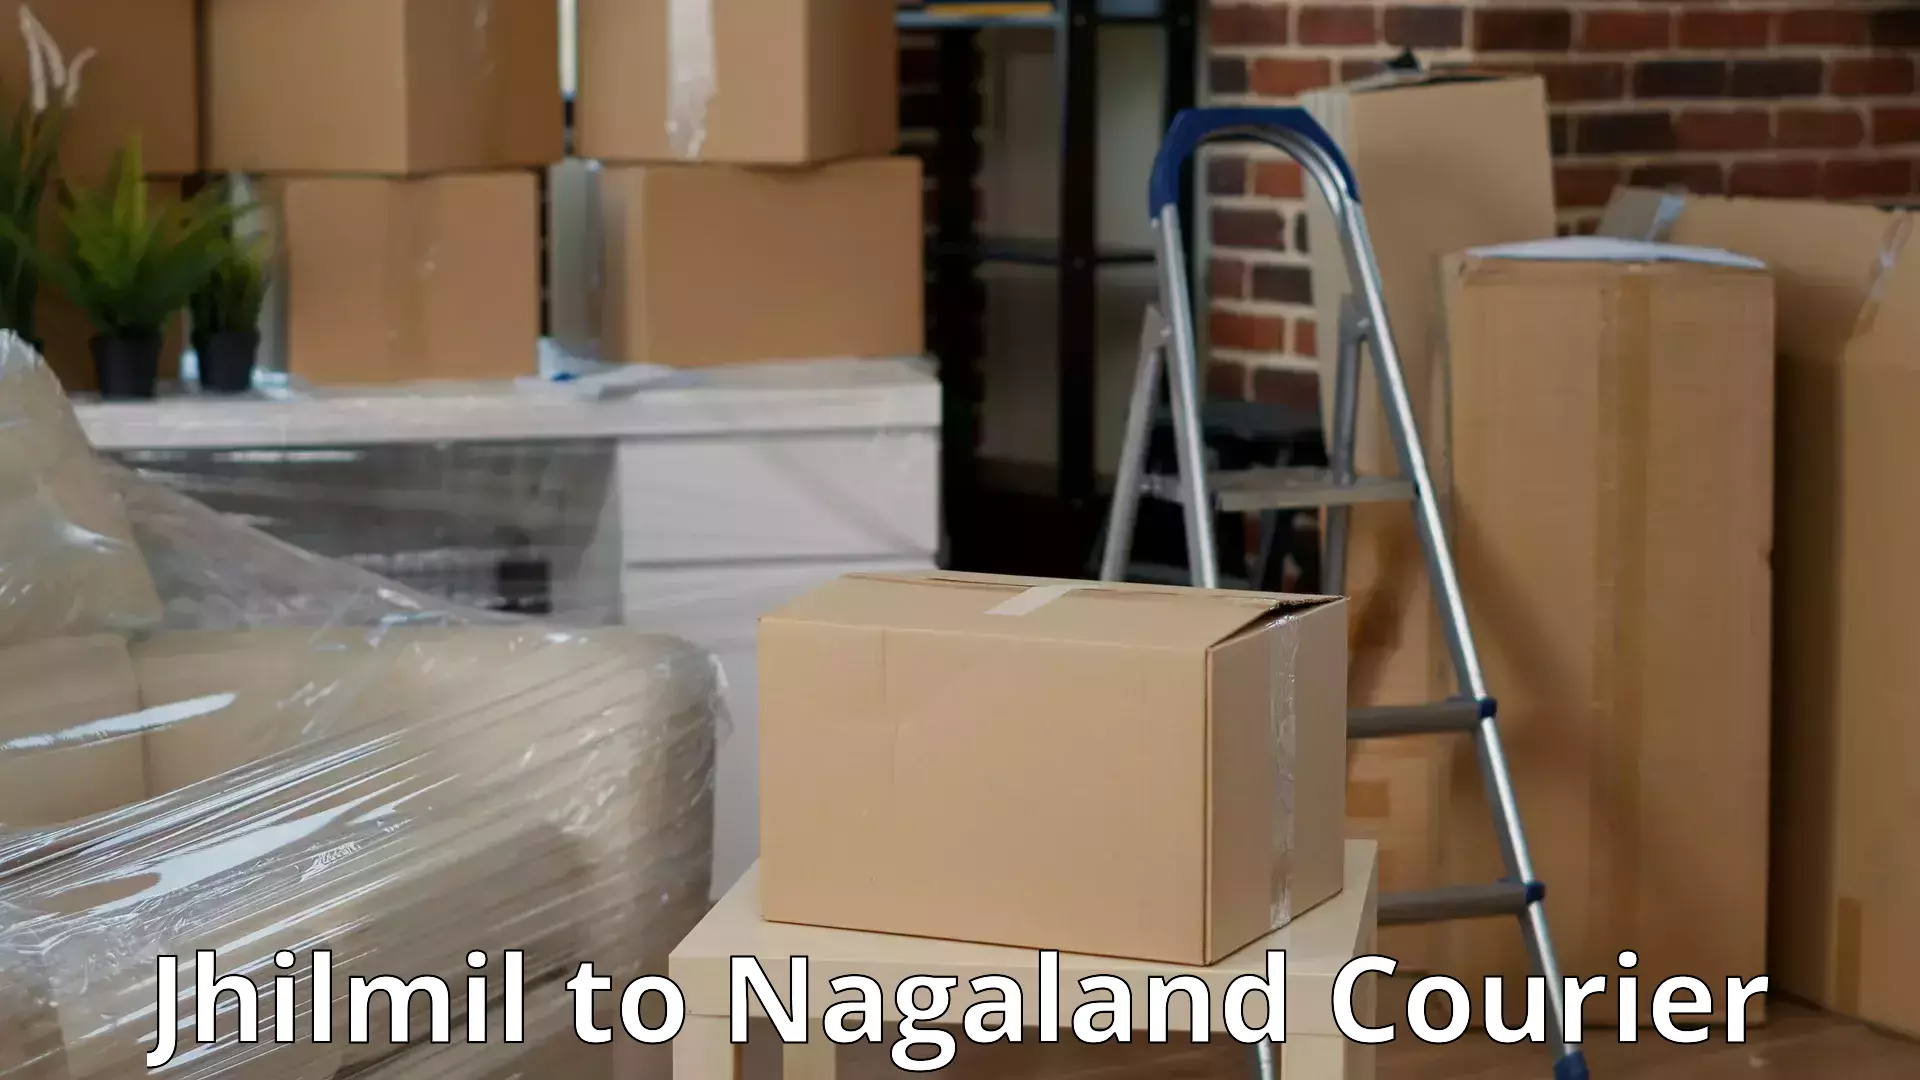 Expert goods movers Jhilmil to Nagaland